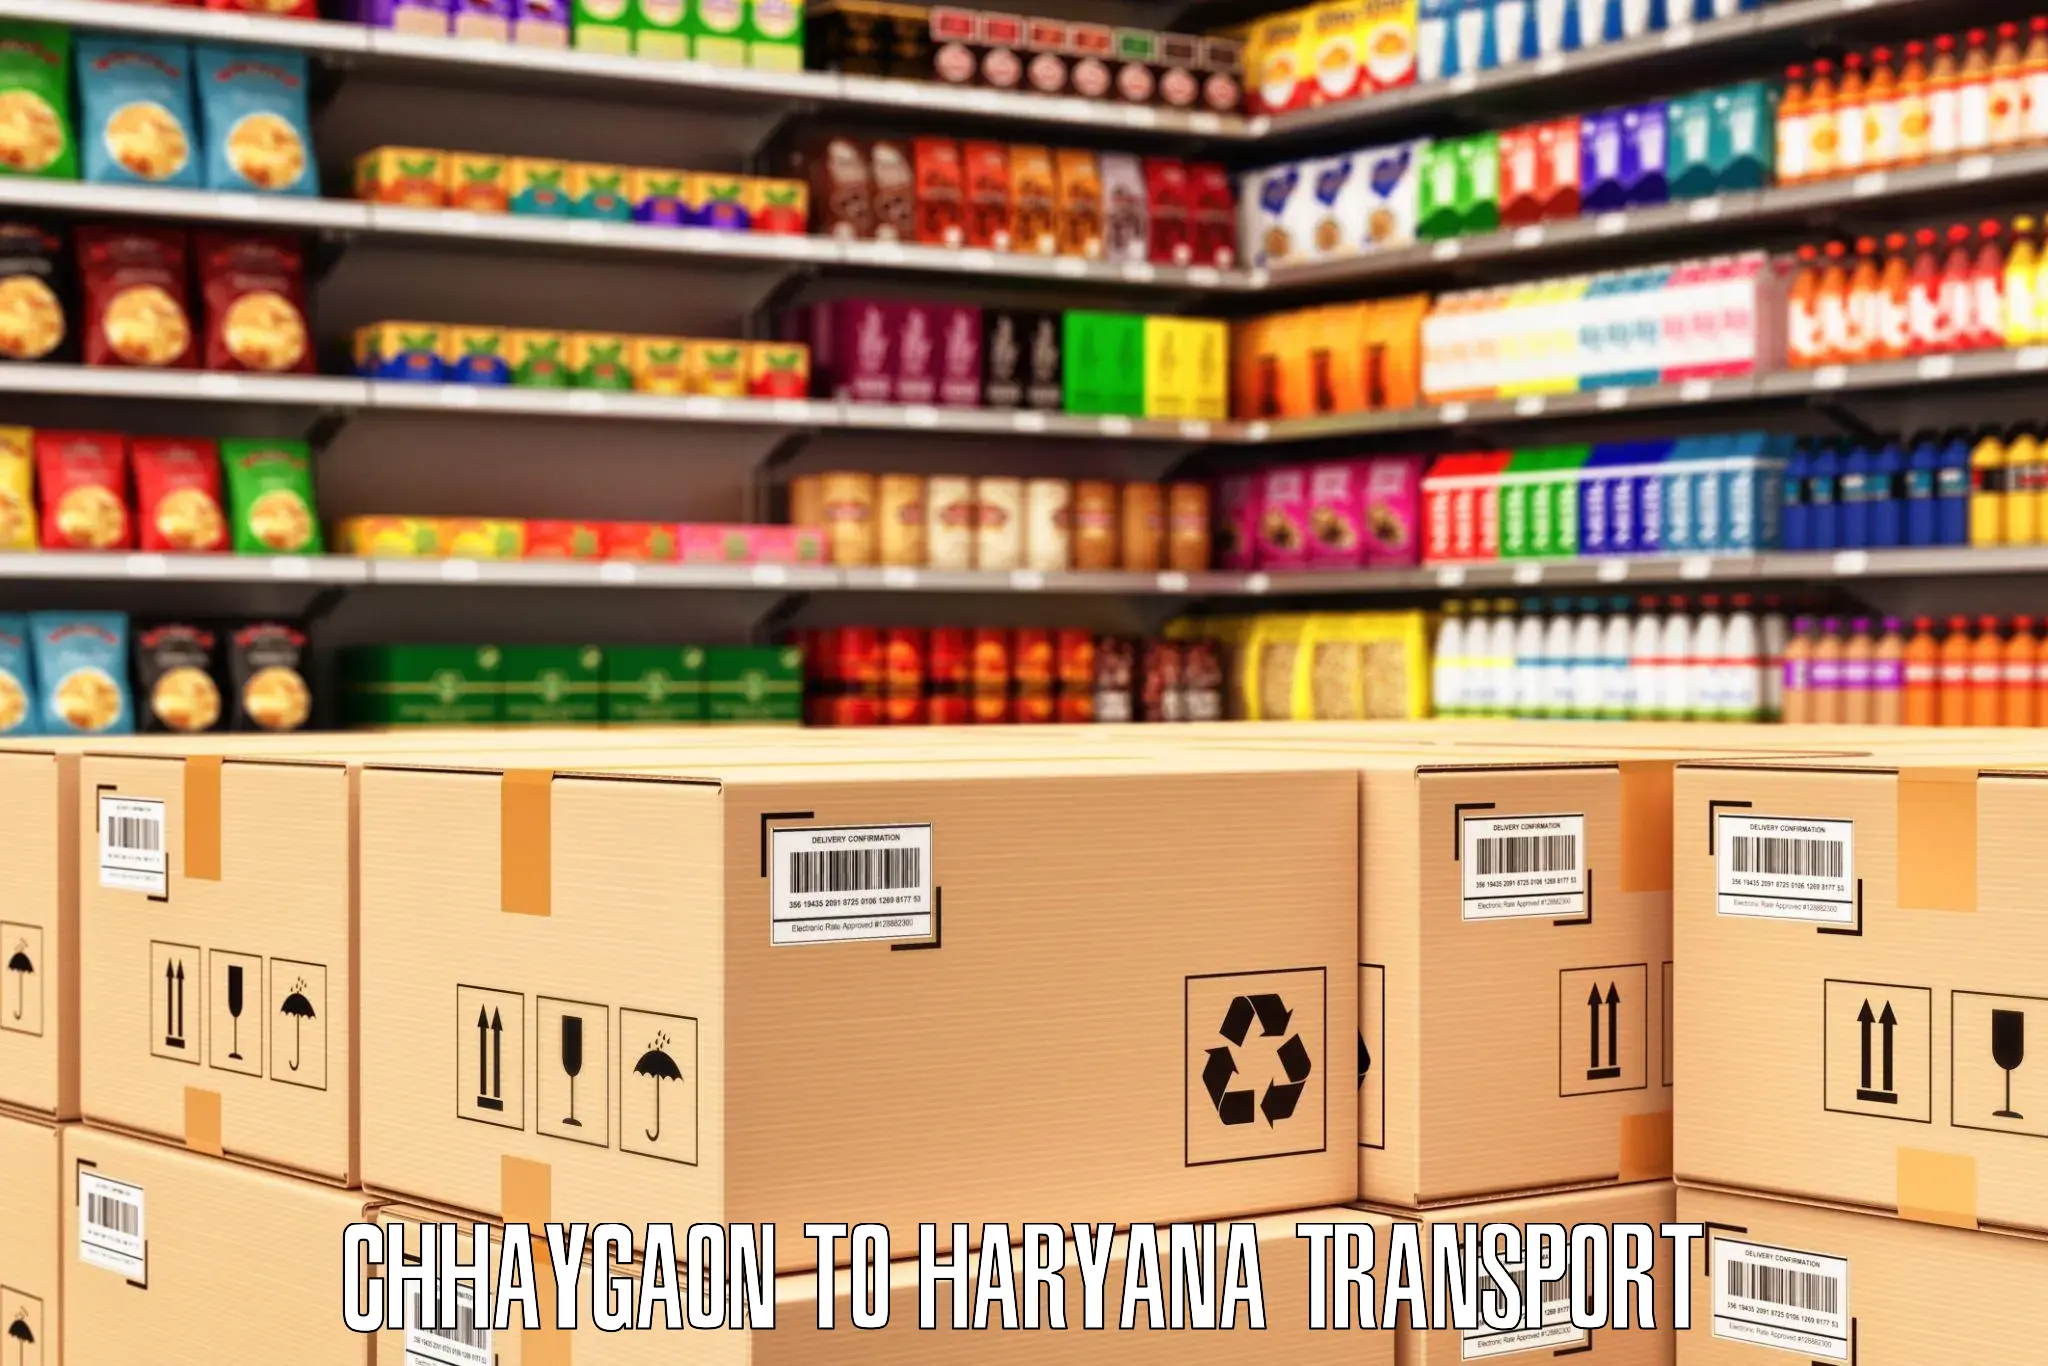 Nearby transport service Chhaygaon to NCR Haryana